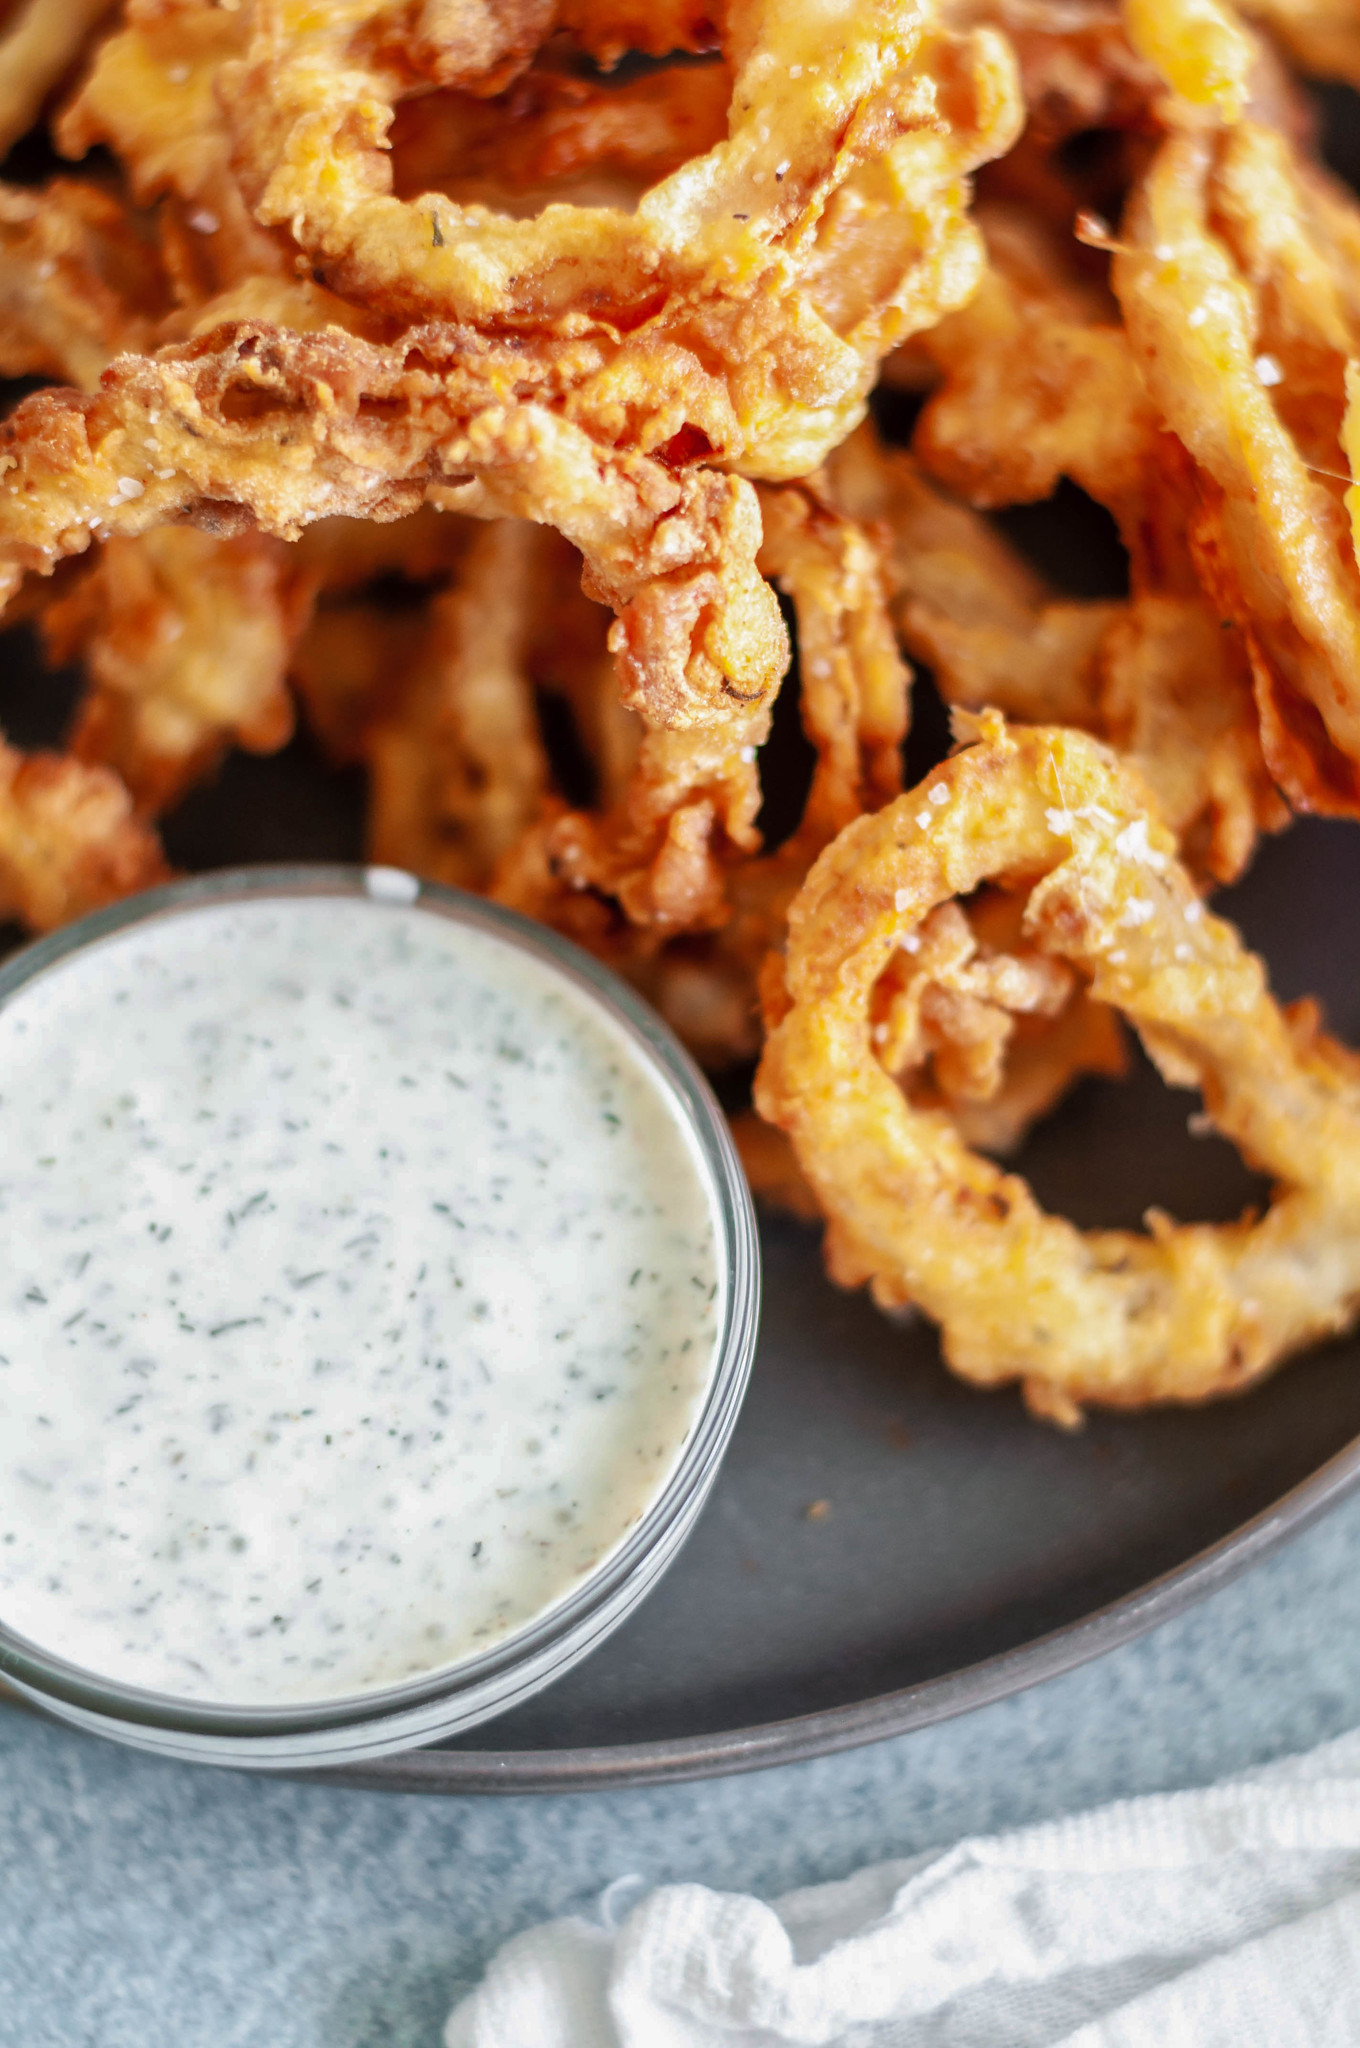 These Crispy Onion Rings with Buttermilk Dill Dressing will be the hit of the party. Perfect for appetizers, game day or to go with your burgers.